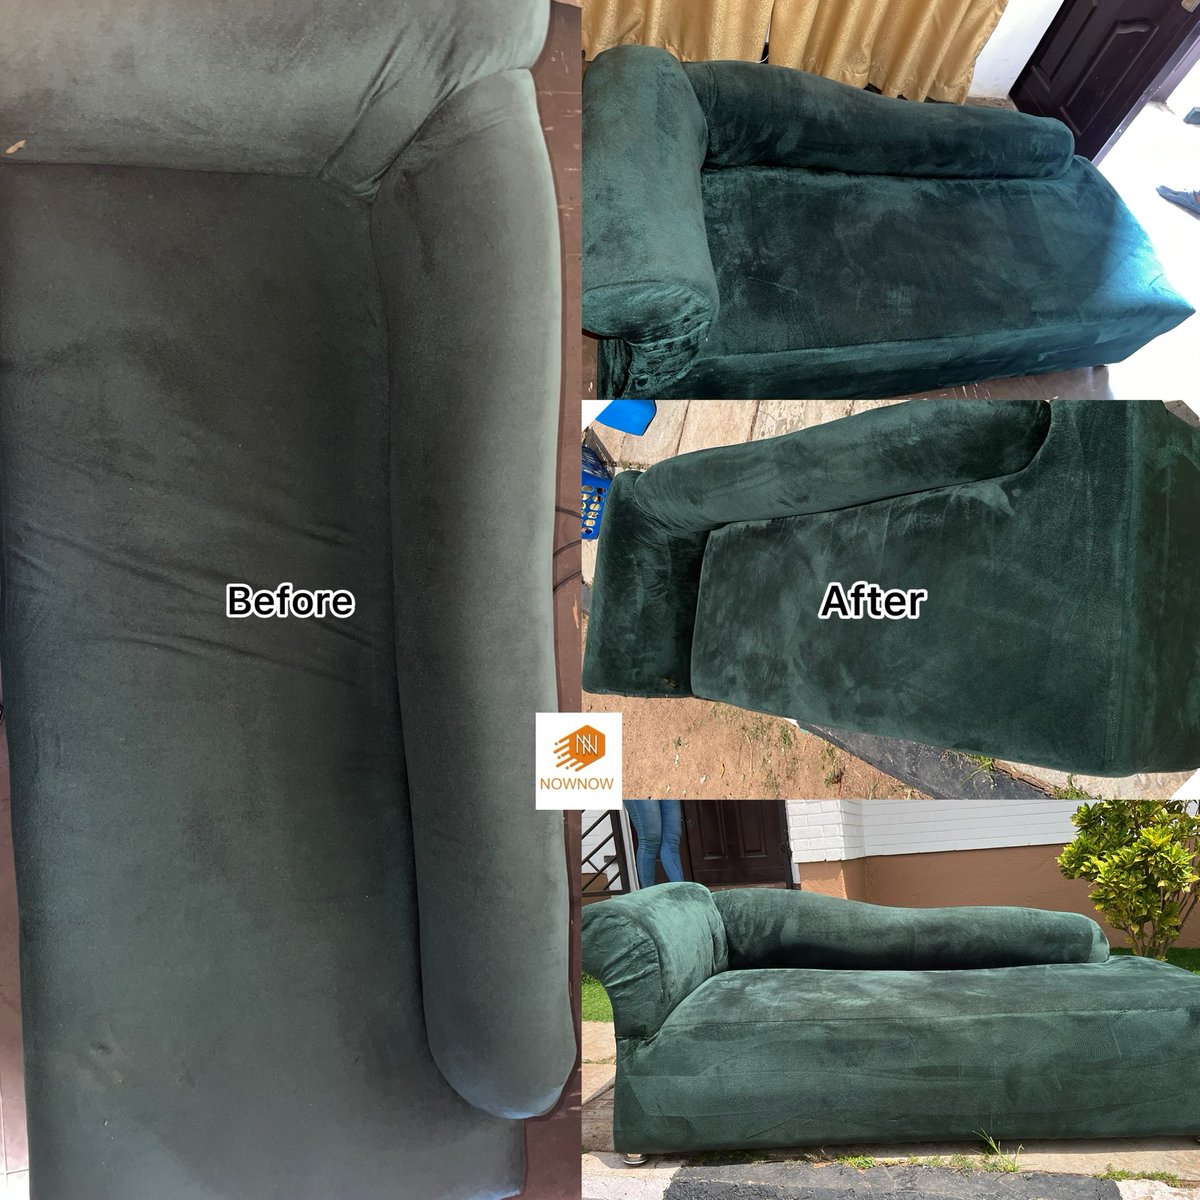 Upholstery cleaning🪑🧹🧽

Dm for bookings @nownowcleaning_laundryservice 
AKURE OFFICE -07060588859
ABUJA OFFICE-07032767721

#akurecleaningservices #akurelaundryservice #cleaningservicesinakure #abujacleaningservices #akurecleaners #akurecleaners #professionalcleaners